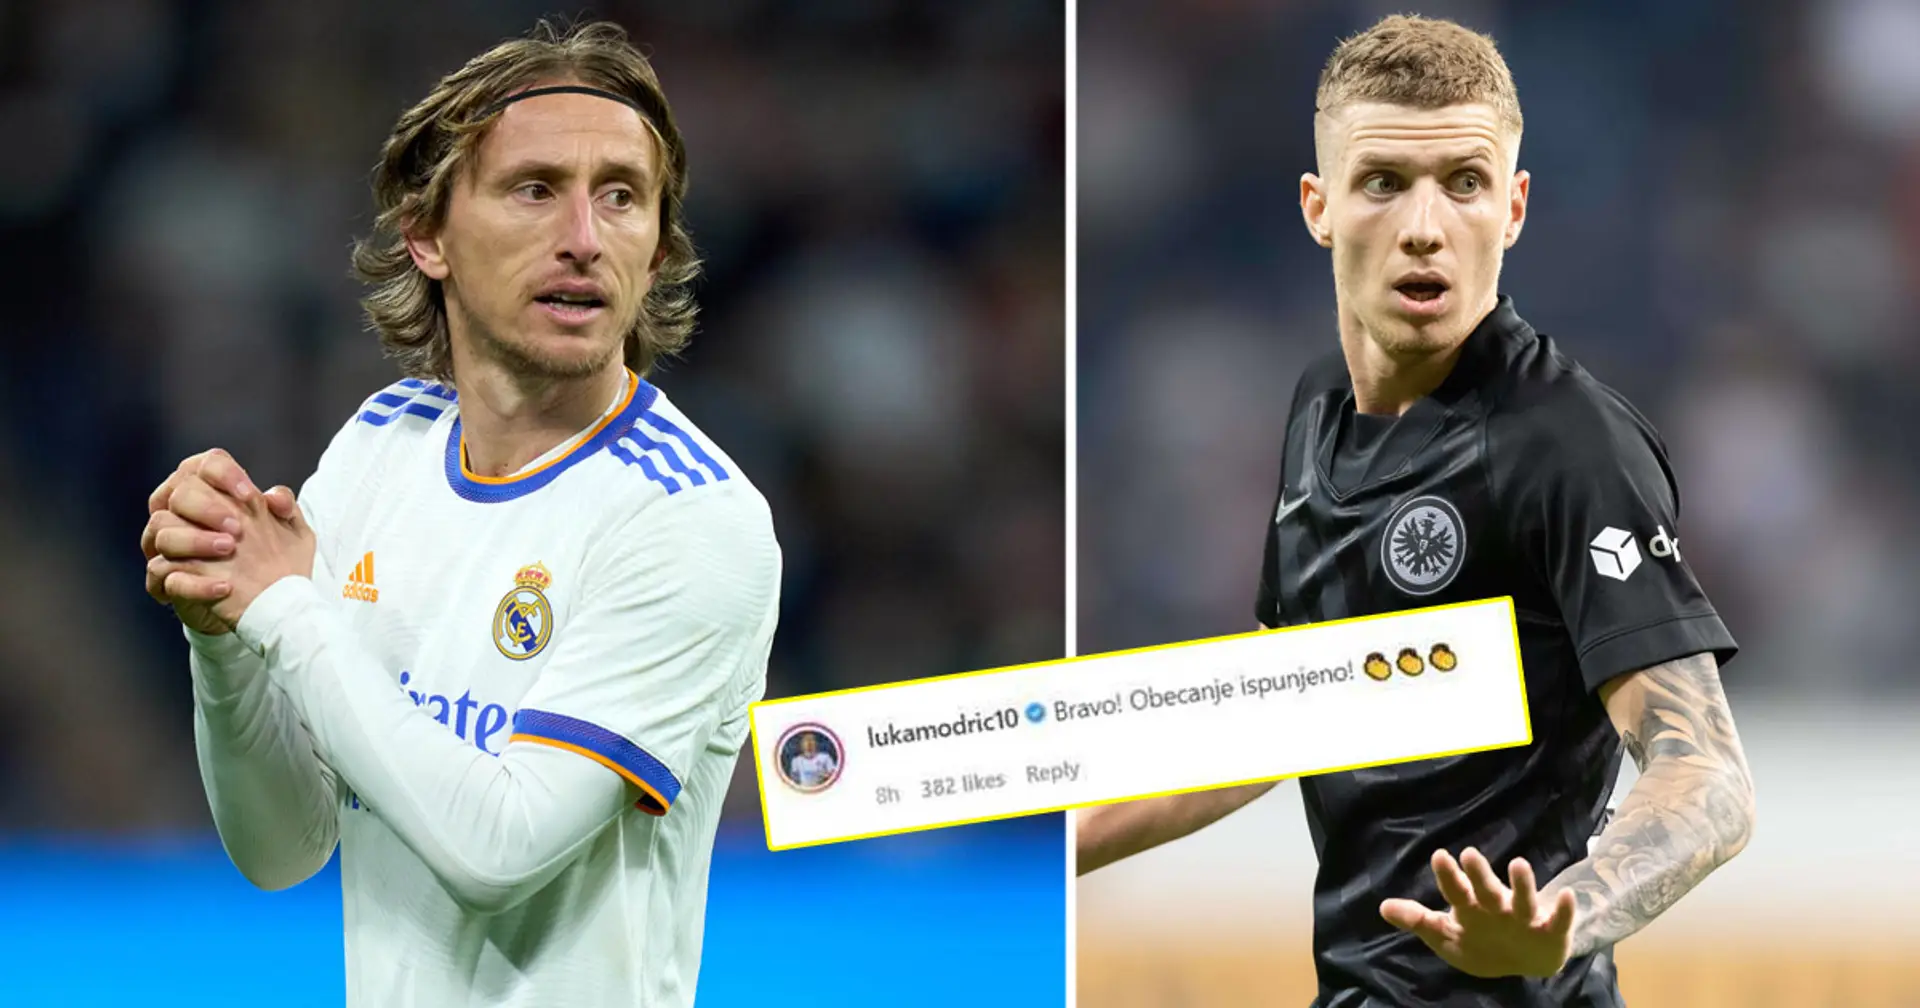 Explained: how Modric played a role in Barca being eliminated from Europa League